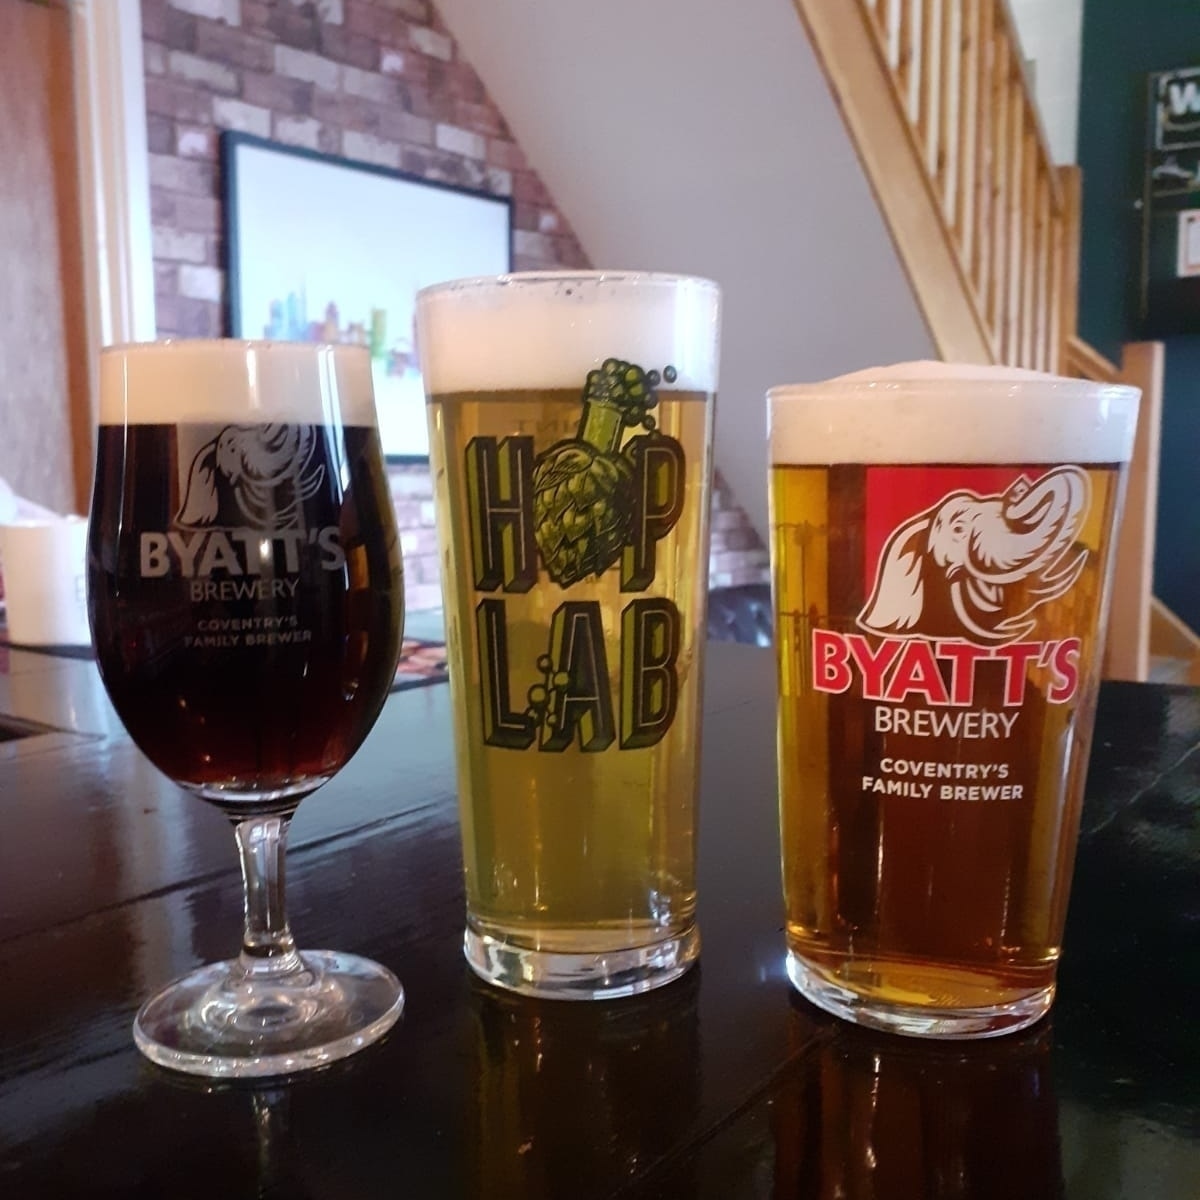 GET YOUR BOOKING IN TODAY FOR Beer Tasting on Friday 19th April at 7pm. This is a great night out, with lots of beery facts and 8 thirds for the amazing price of £20pp! To book your place give us a call on 02476 637996. Bookings close on Monday 15th April at 5pm.